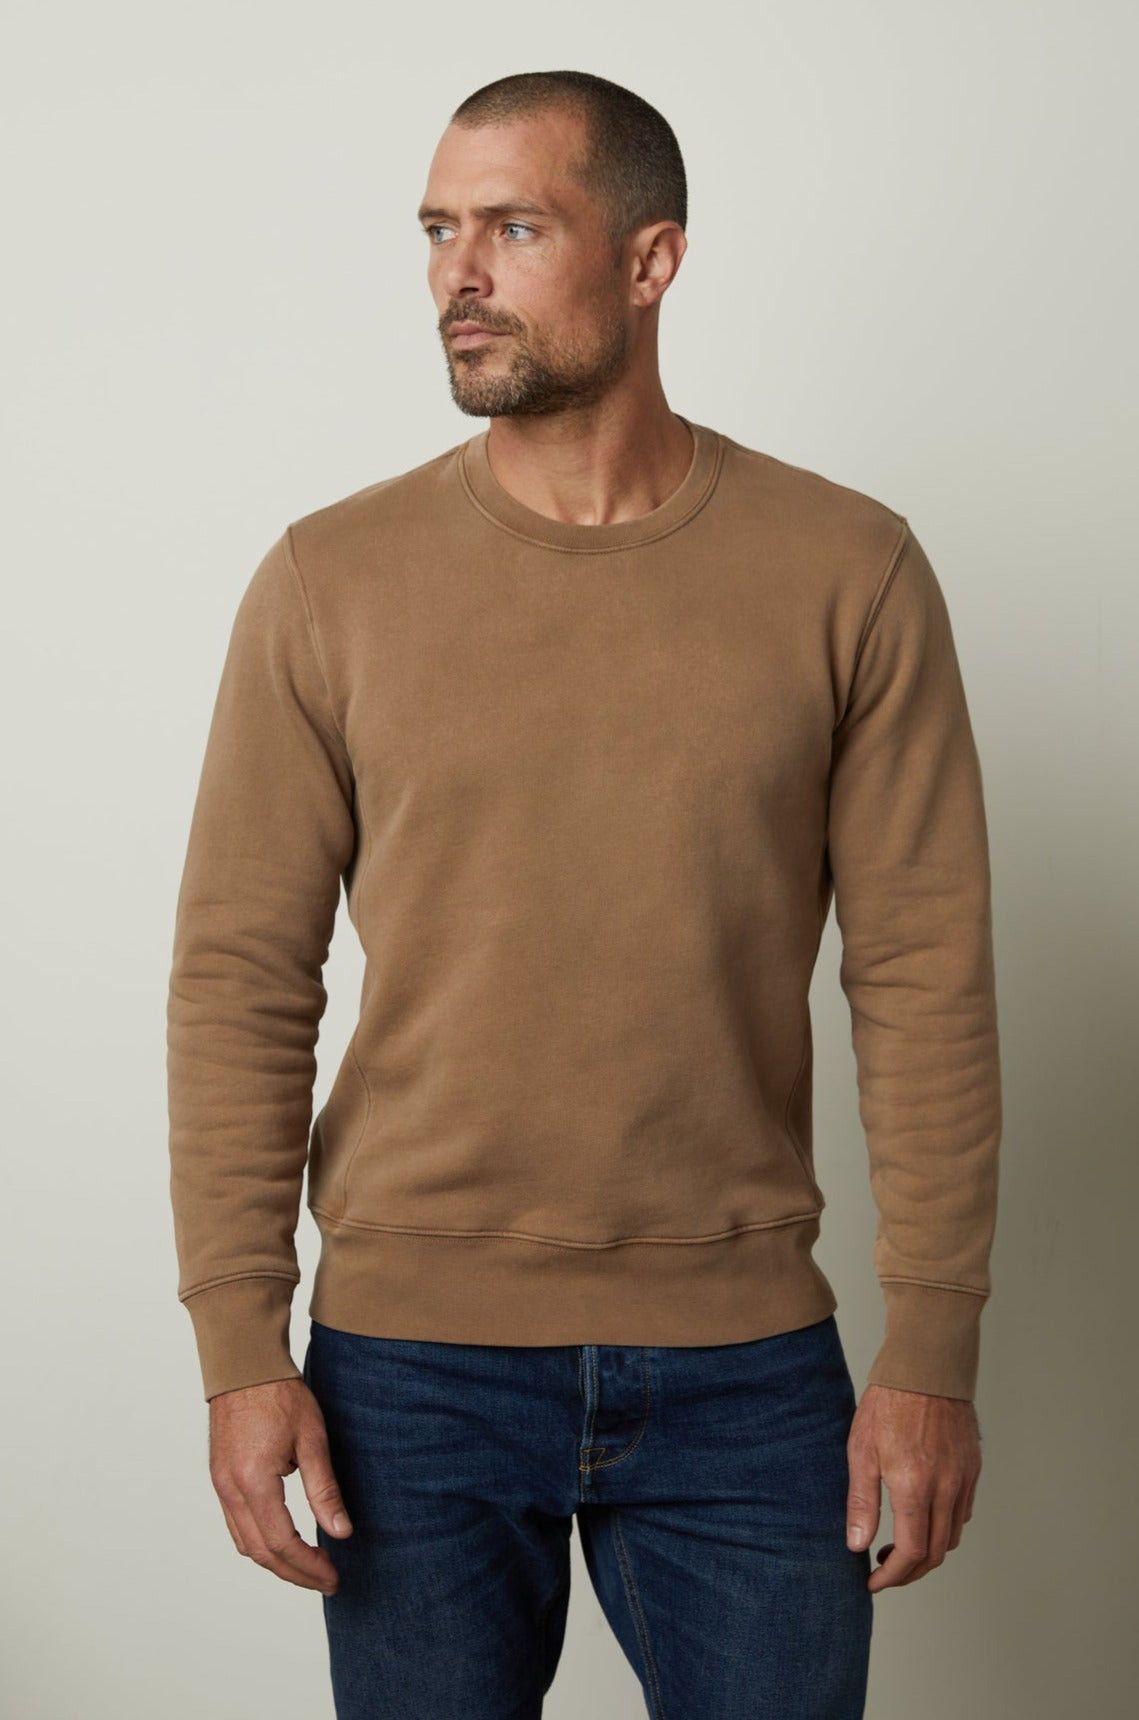   A man wearing a Velvet by Graham & Spencer MATTS CREW NECK SWEATSHIRT for comfort and warmth. 